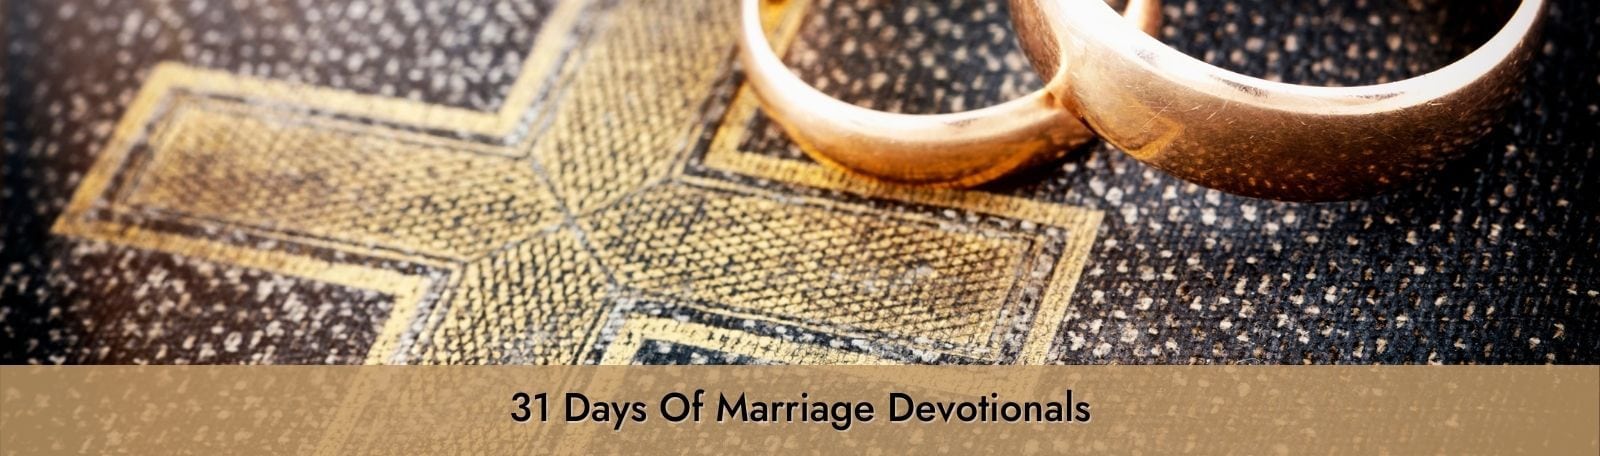 Featured image for “31 Days of Marriage Devotionals”